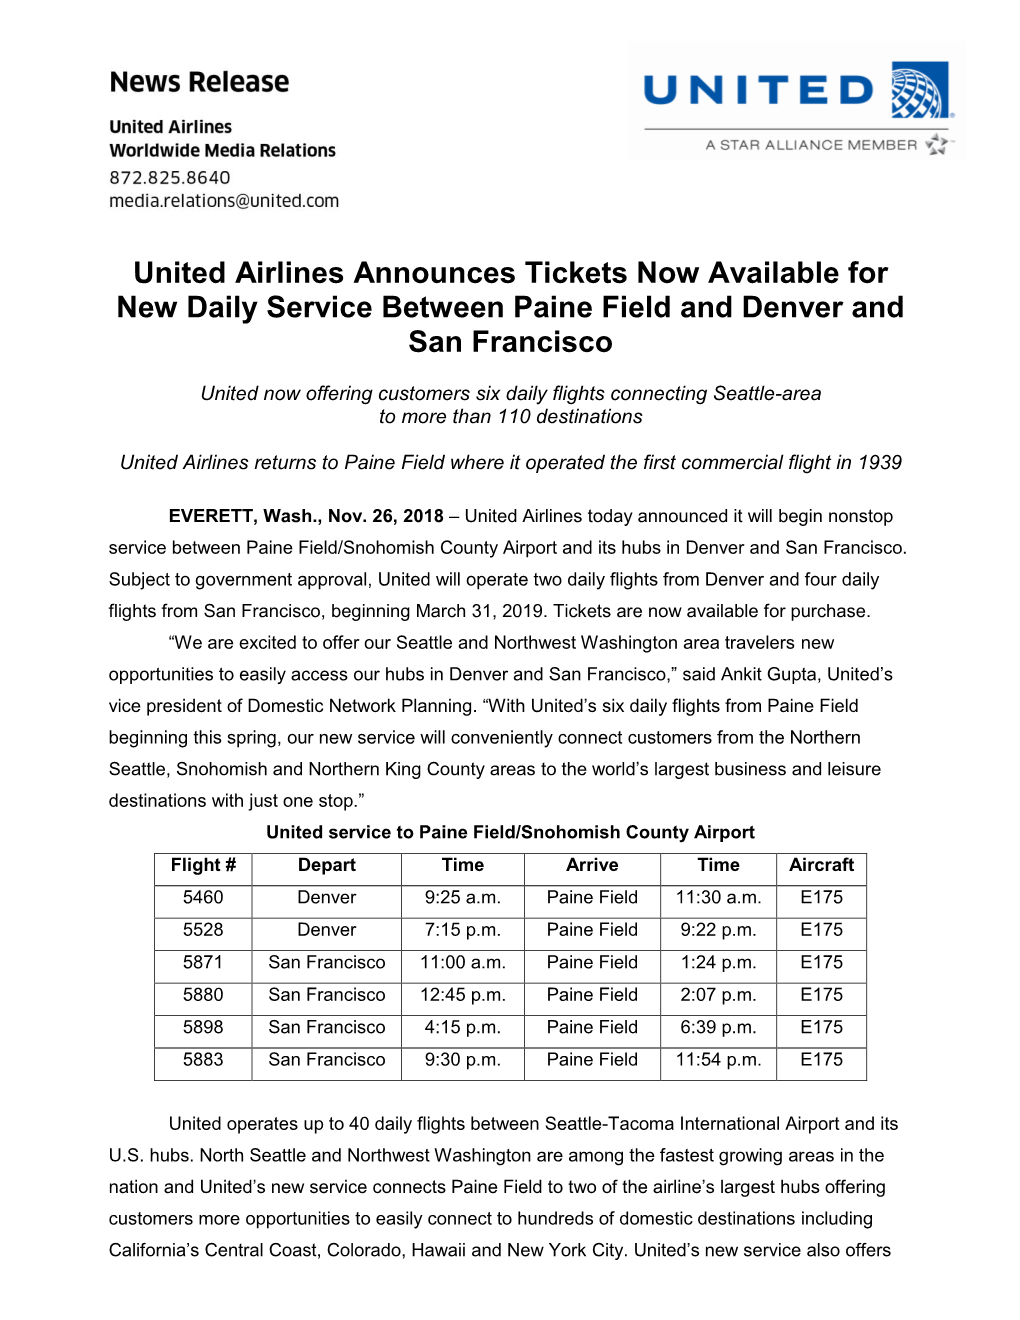 United Airlines Announces Tickets Now Available for New Daily Service Between Paine Field and Denver and San Francisco